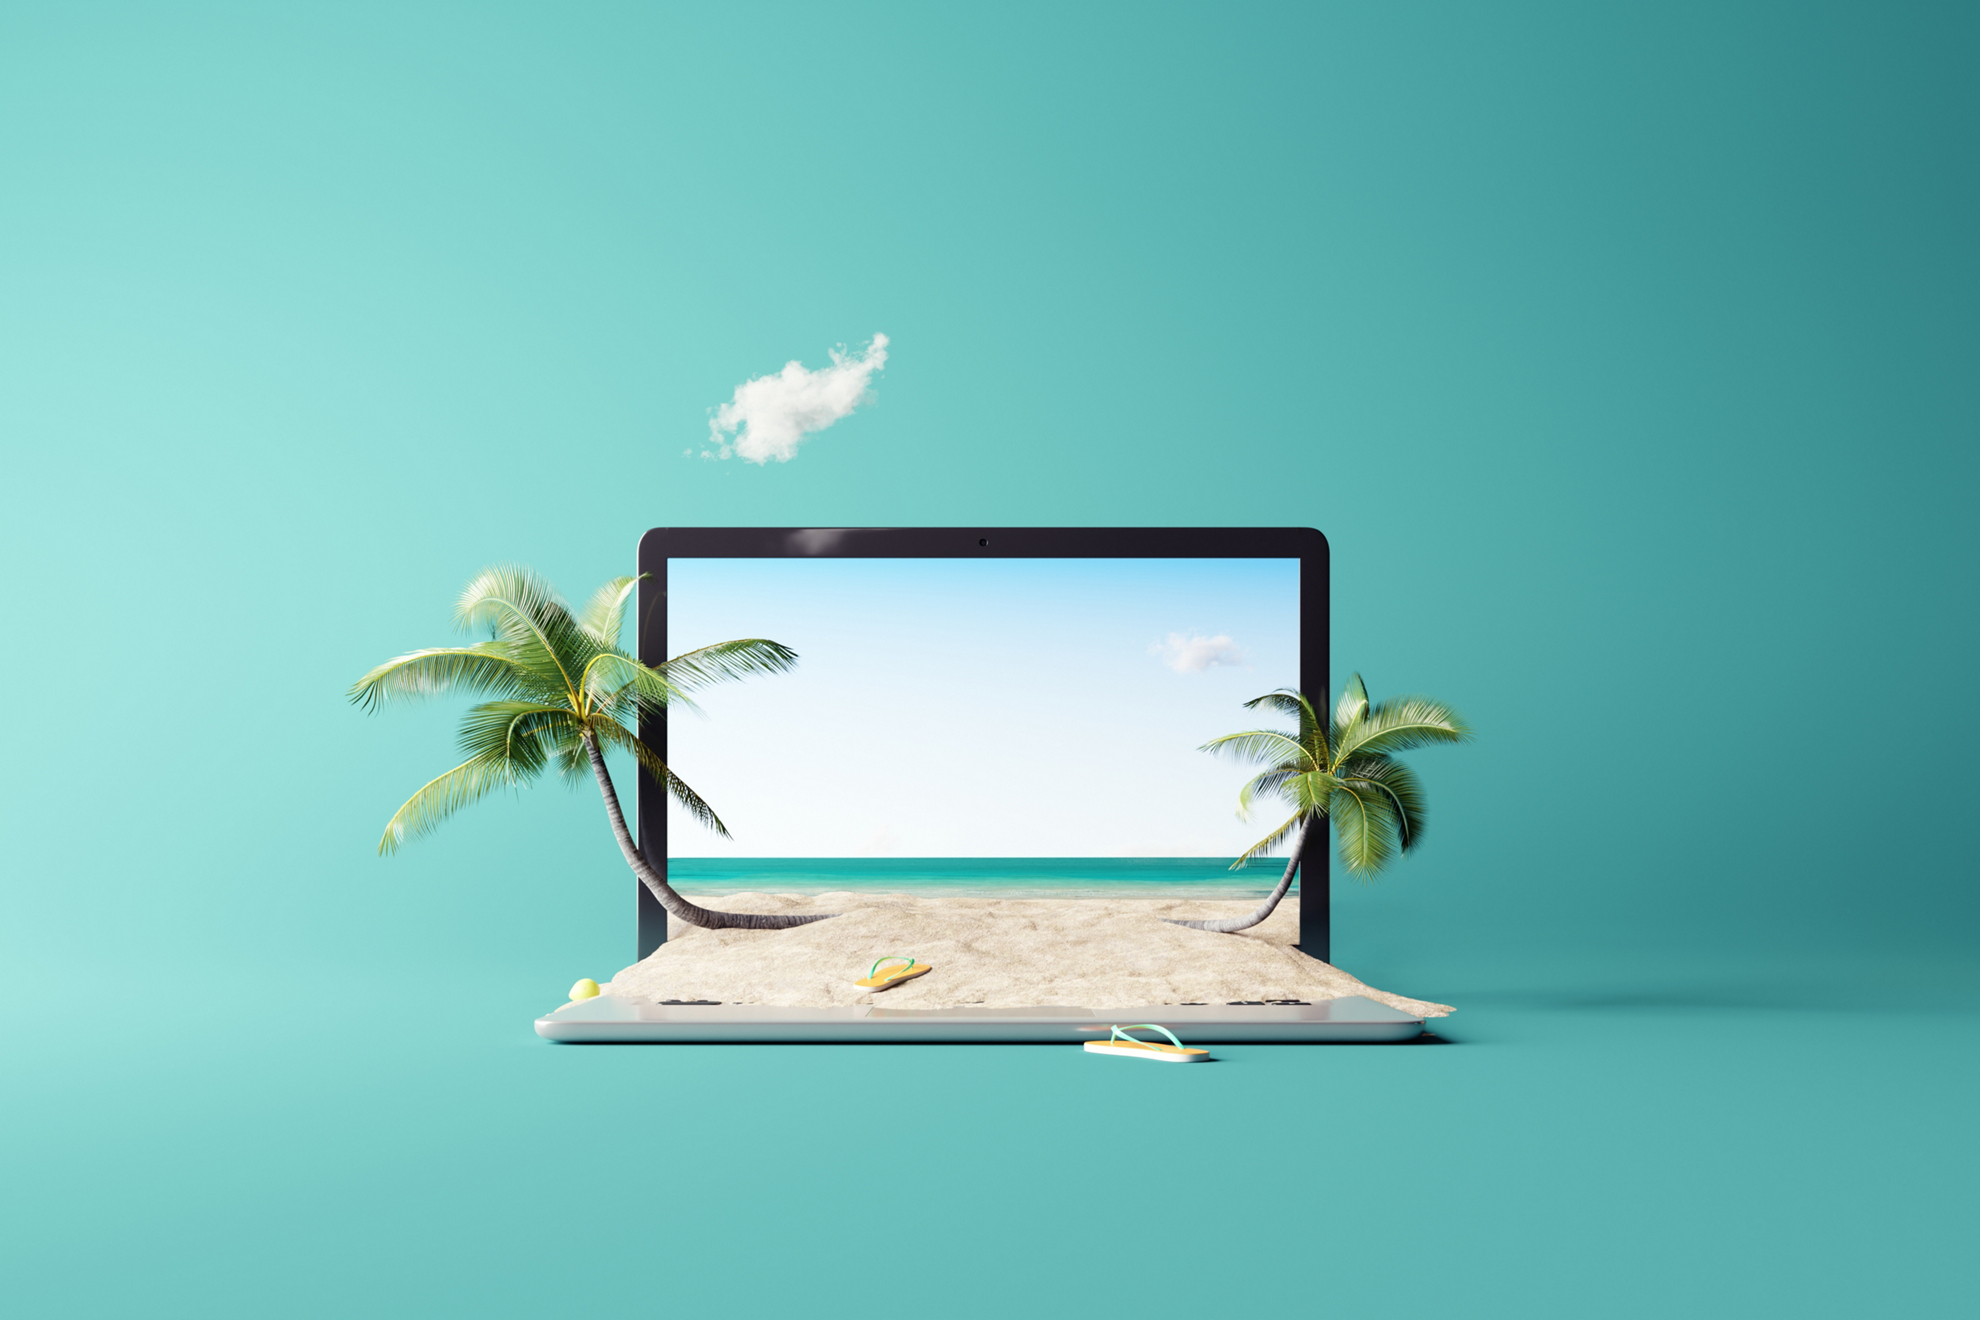 Cyber Monday travel deals: A laptop with a pile of sand on top with palm trees